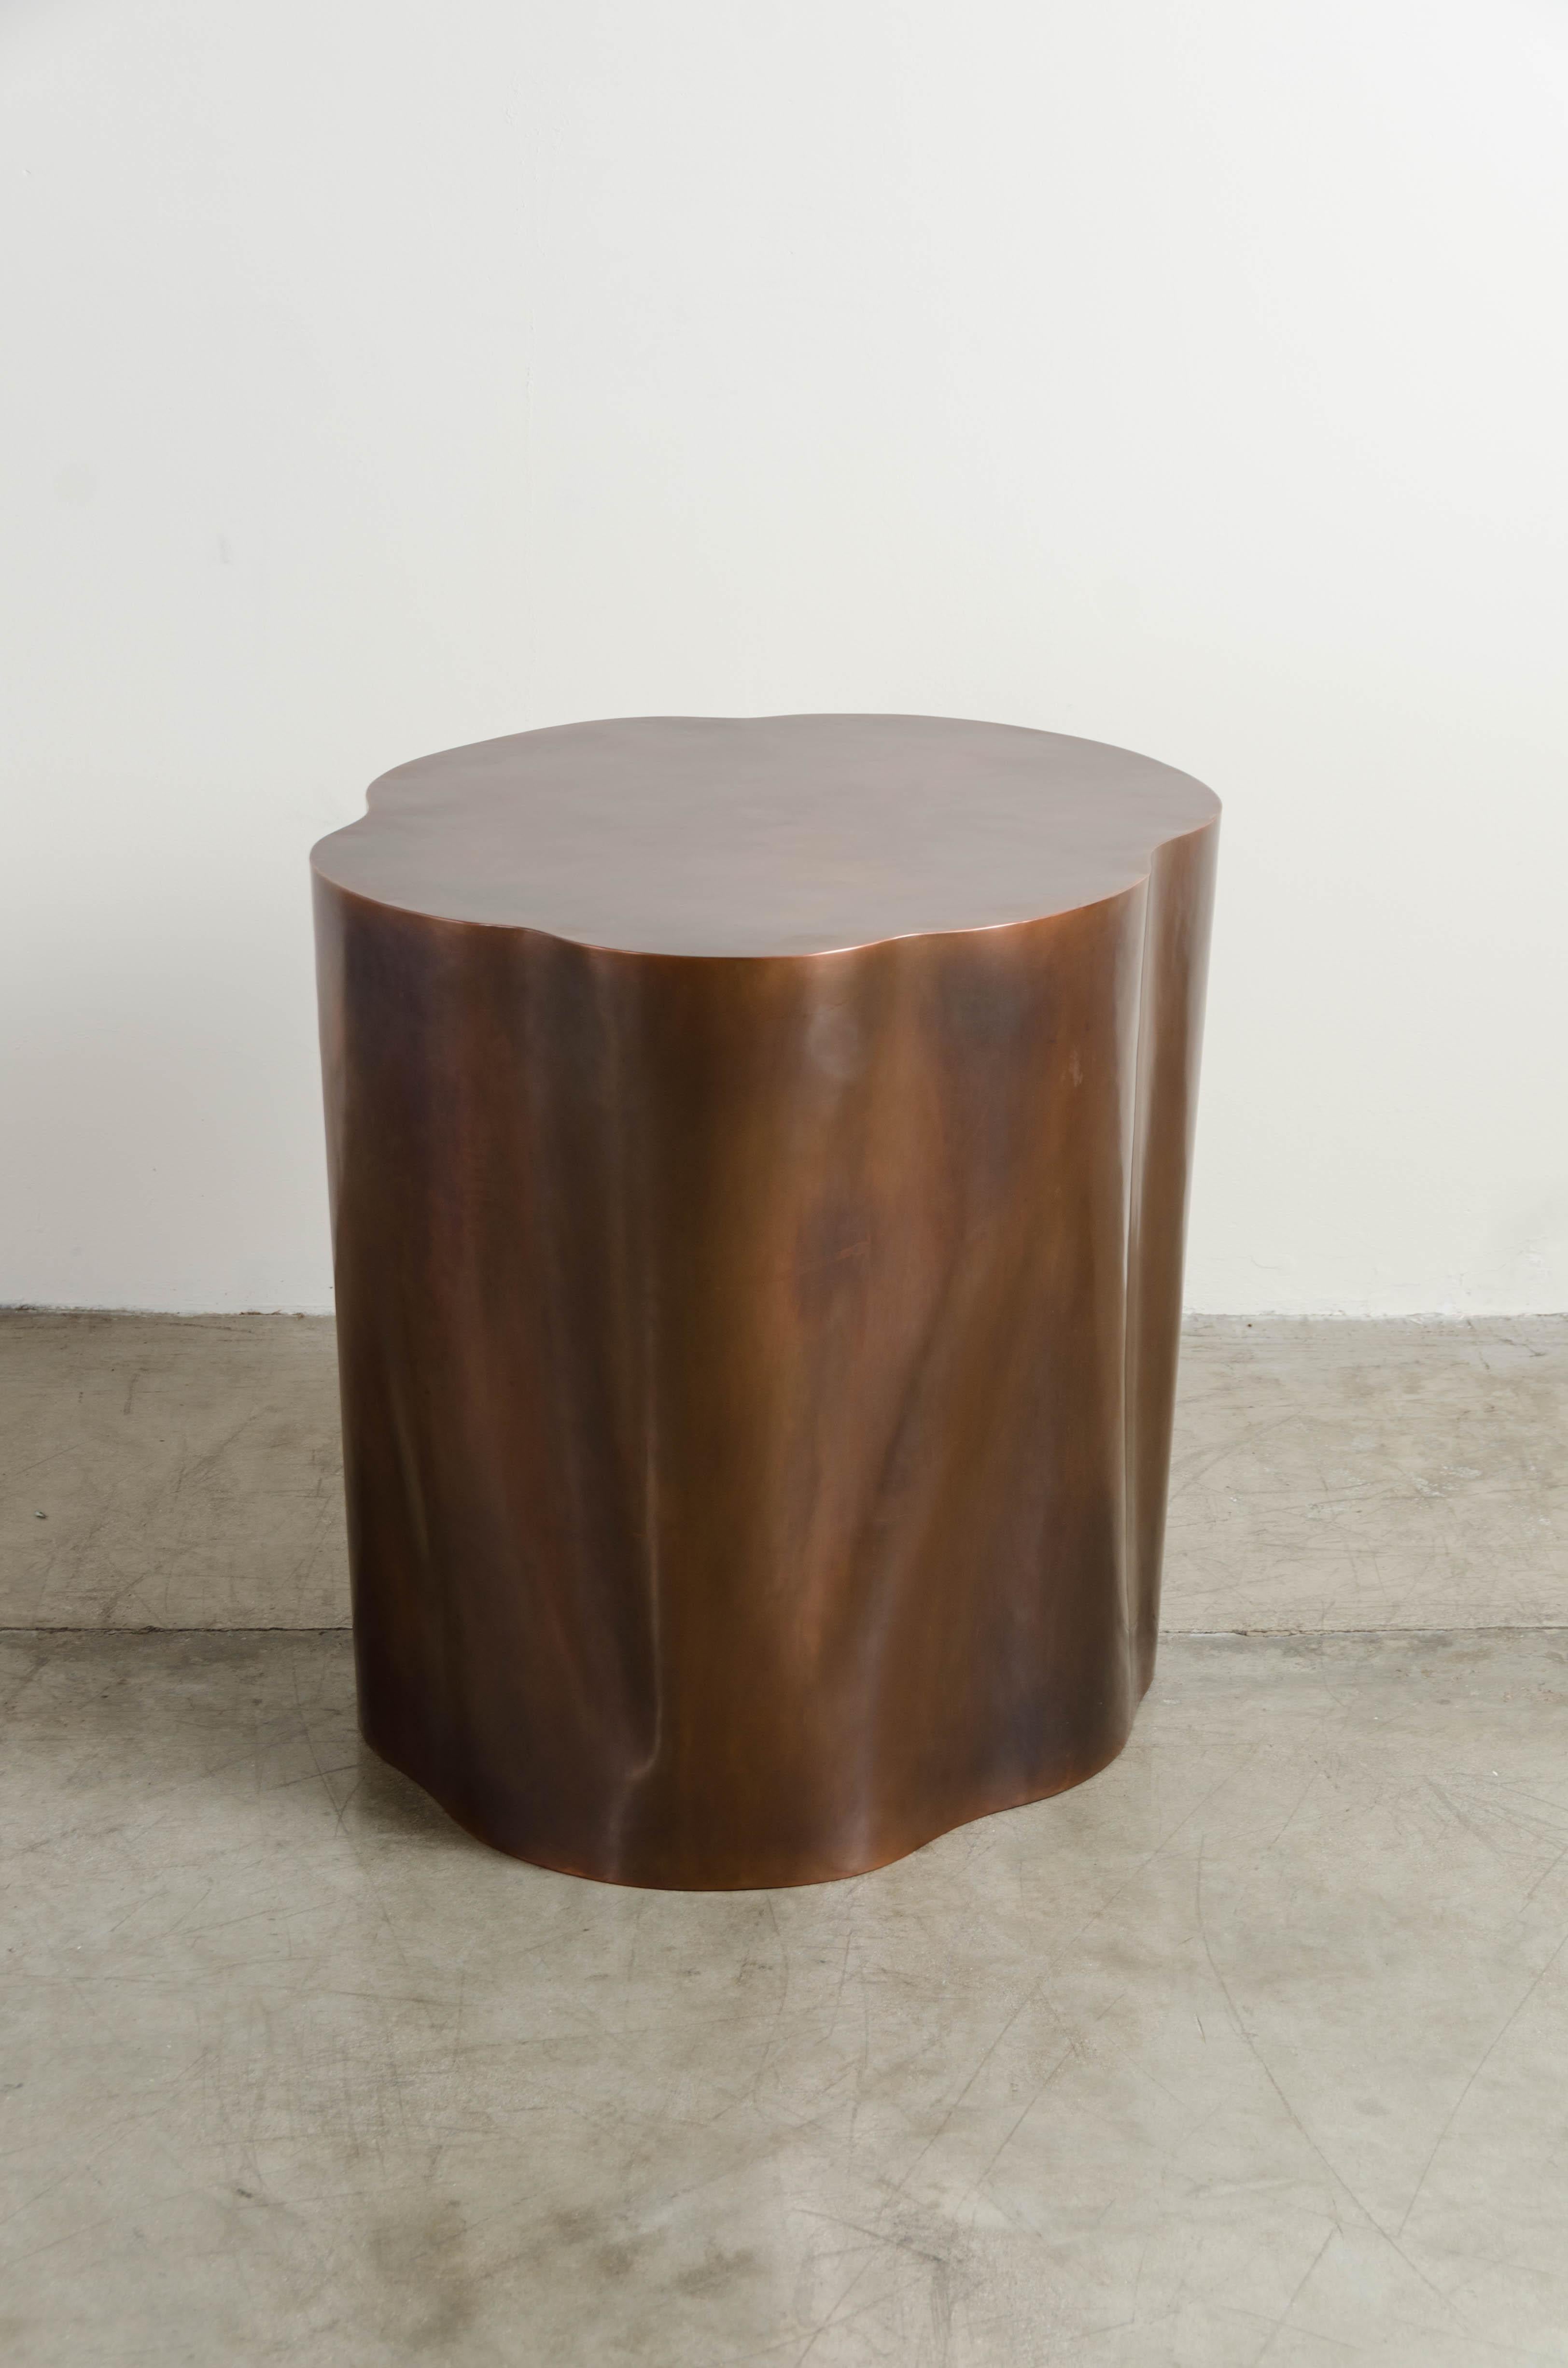 Repoussé Root Shape Side Table in Copper by Robert Kuo, Limited Edition